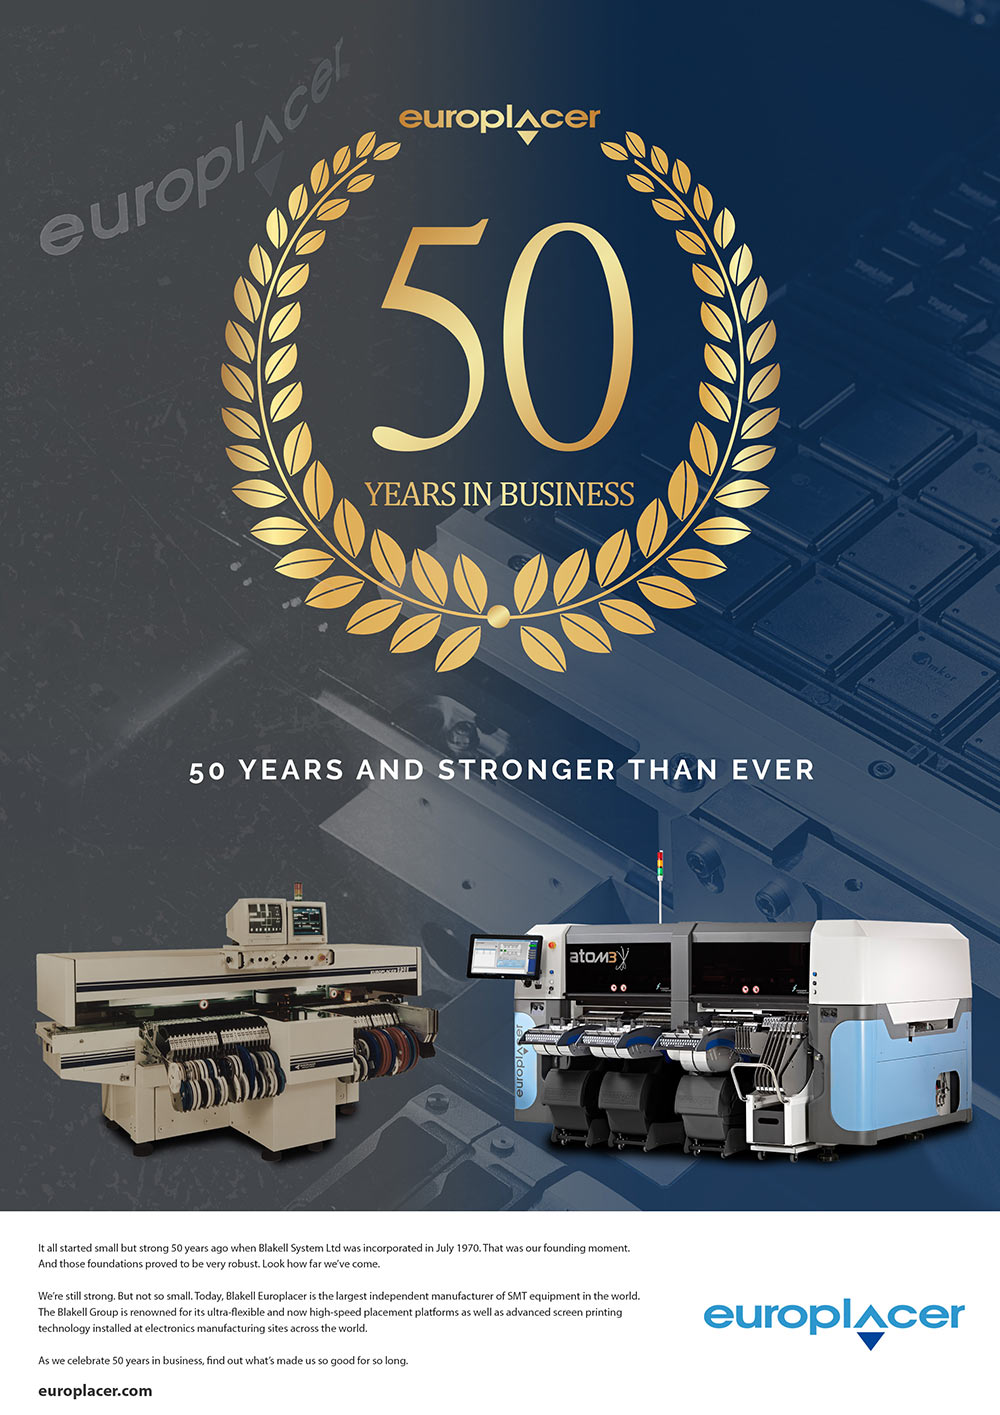 Europlacer 50 years in business advertisement